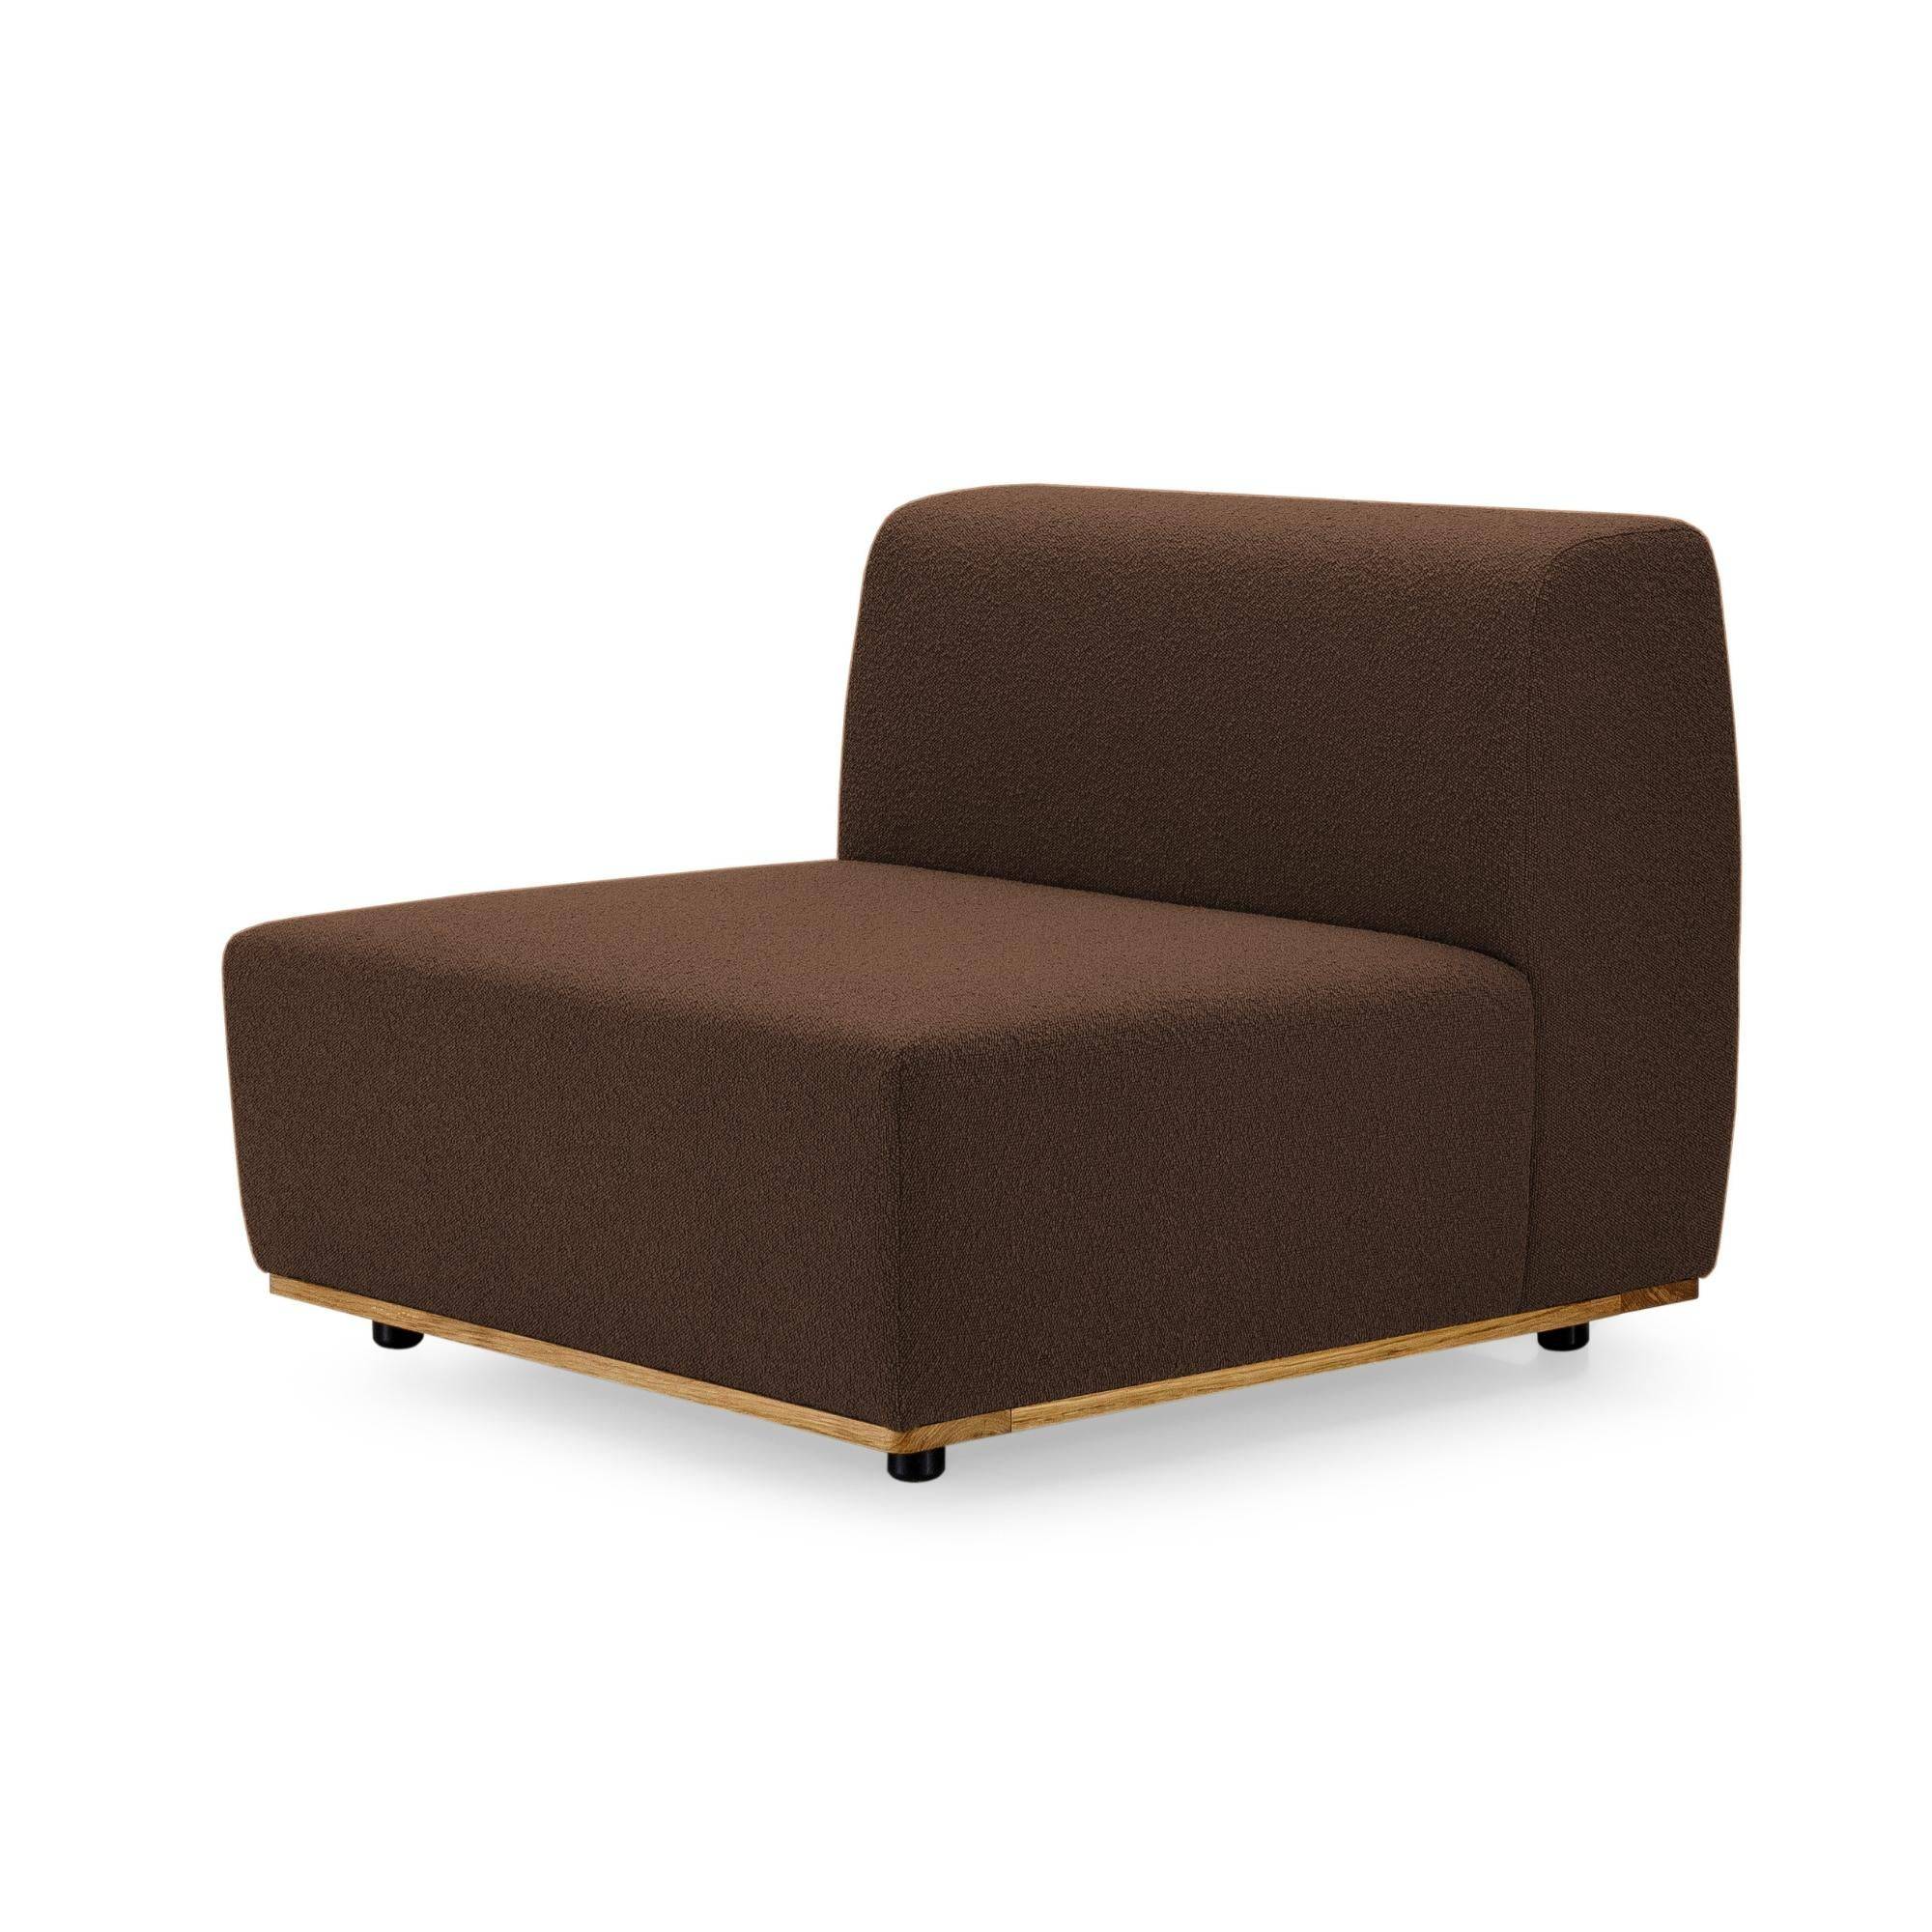 Saler Lounge Chair, Symphony Mills - Choco - THAT COOL LIVING